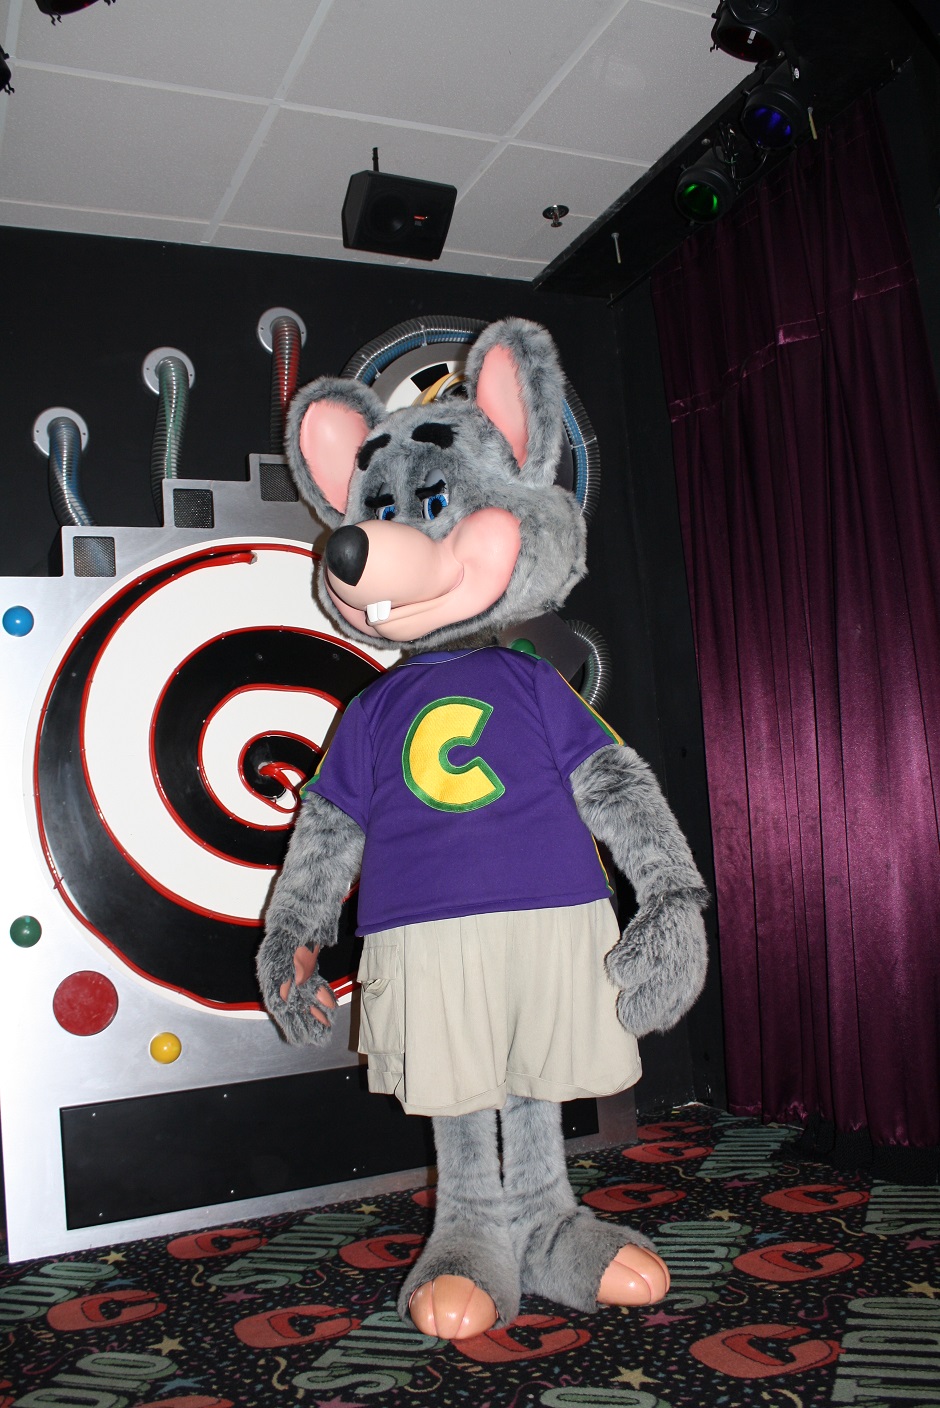 Partying with Chuck E. Cheese's 5